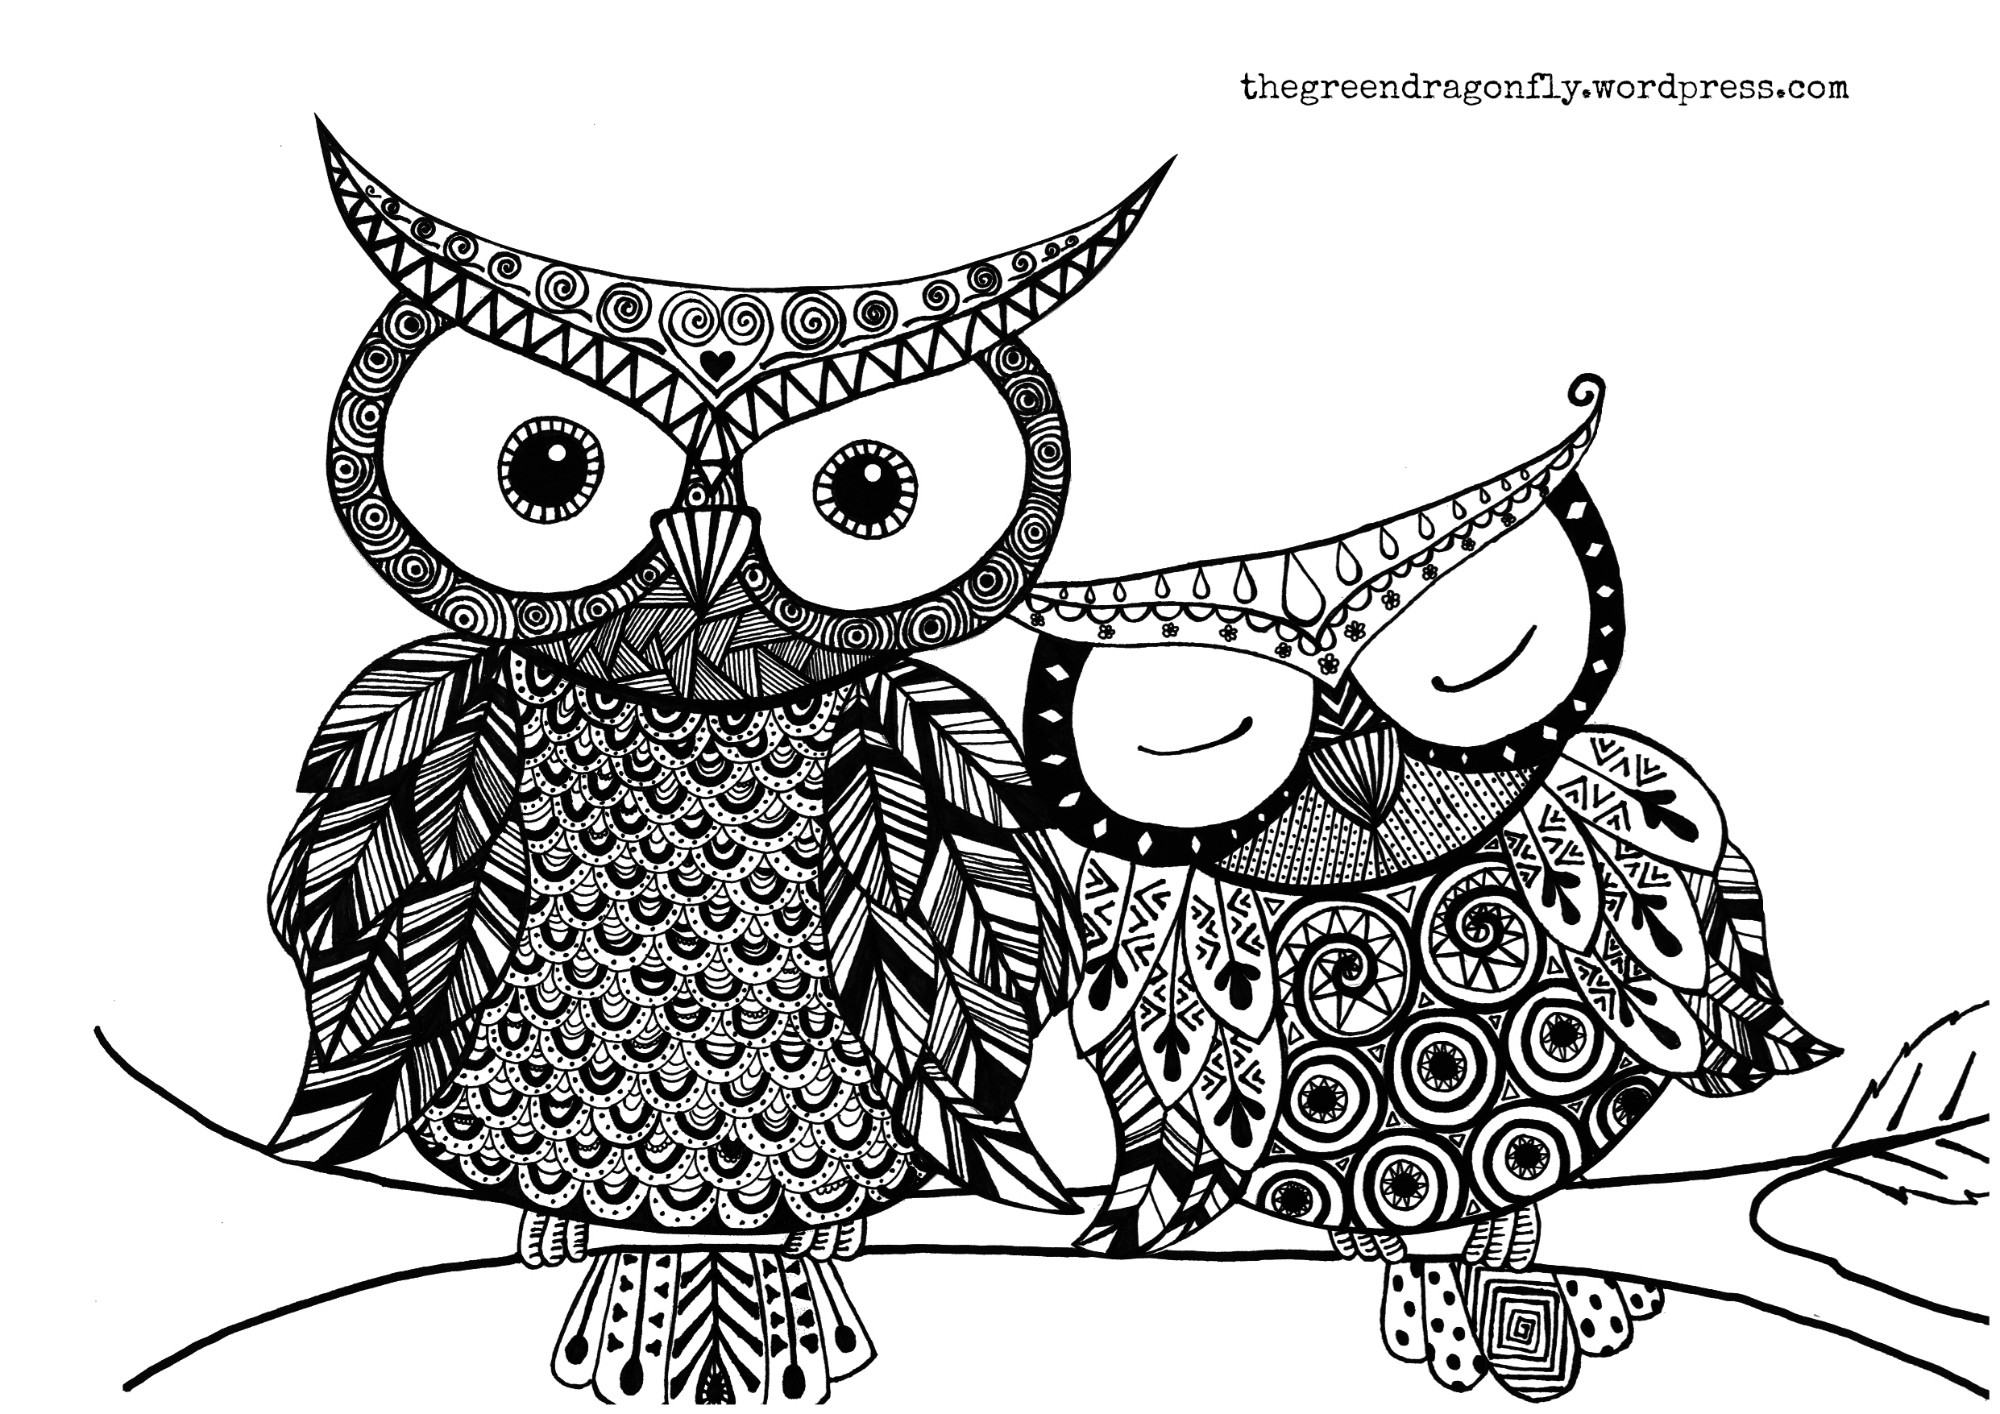 Printable Owl Coloring Pages For Adults
 Coloring sheet – The Green Dragonfly